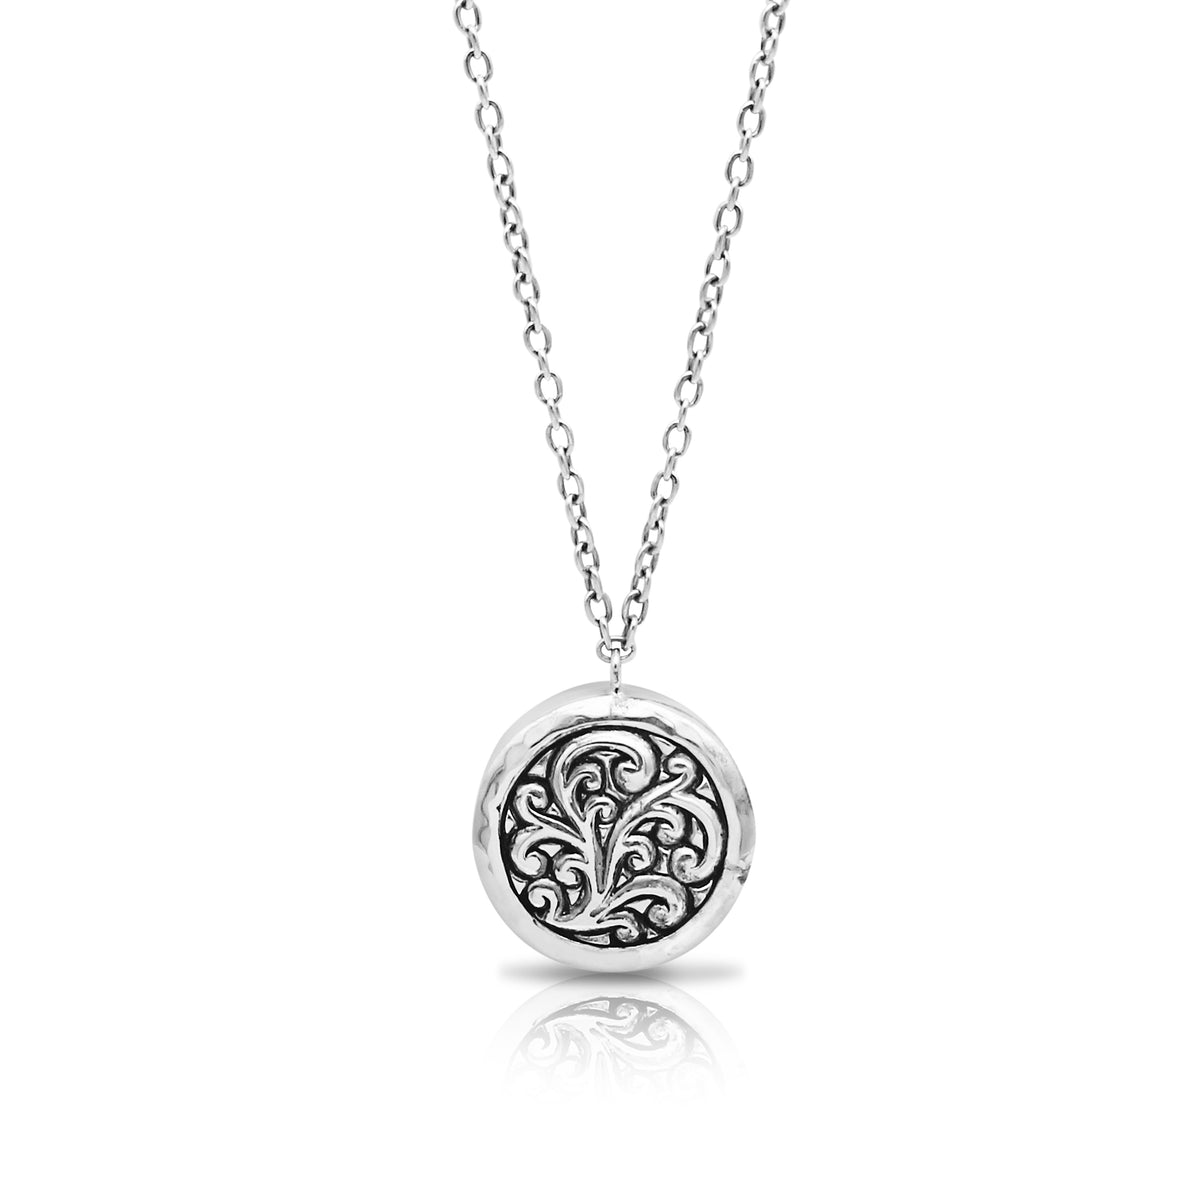 LH Scroll Repousse Round Pendant (19mm) Necklace 18" - 19" Chain